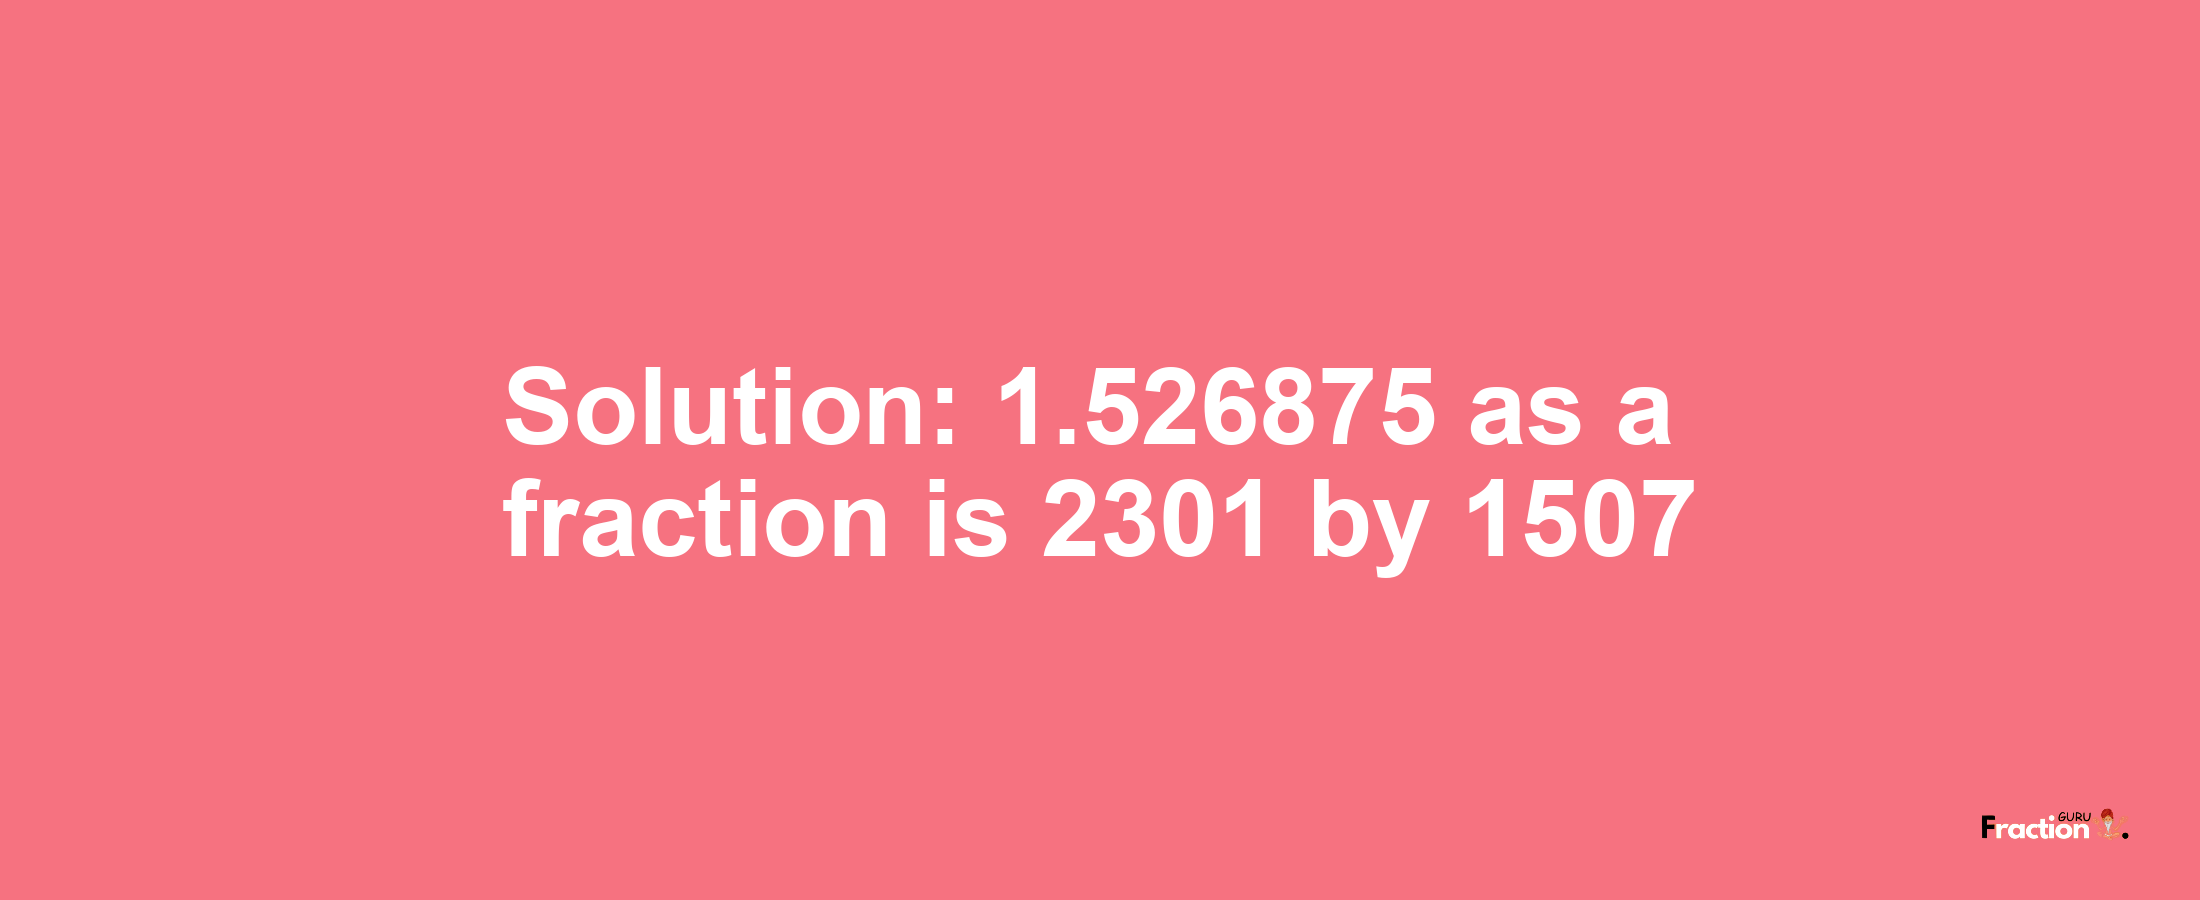 Solution:1.526875 as a fraction is 2301/1507